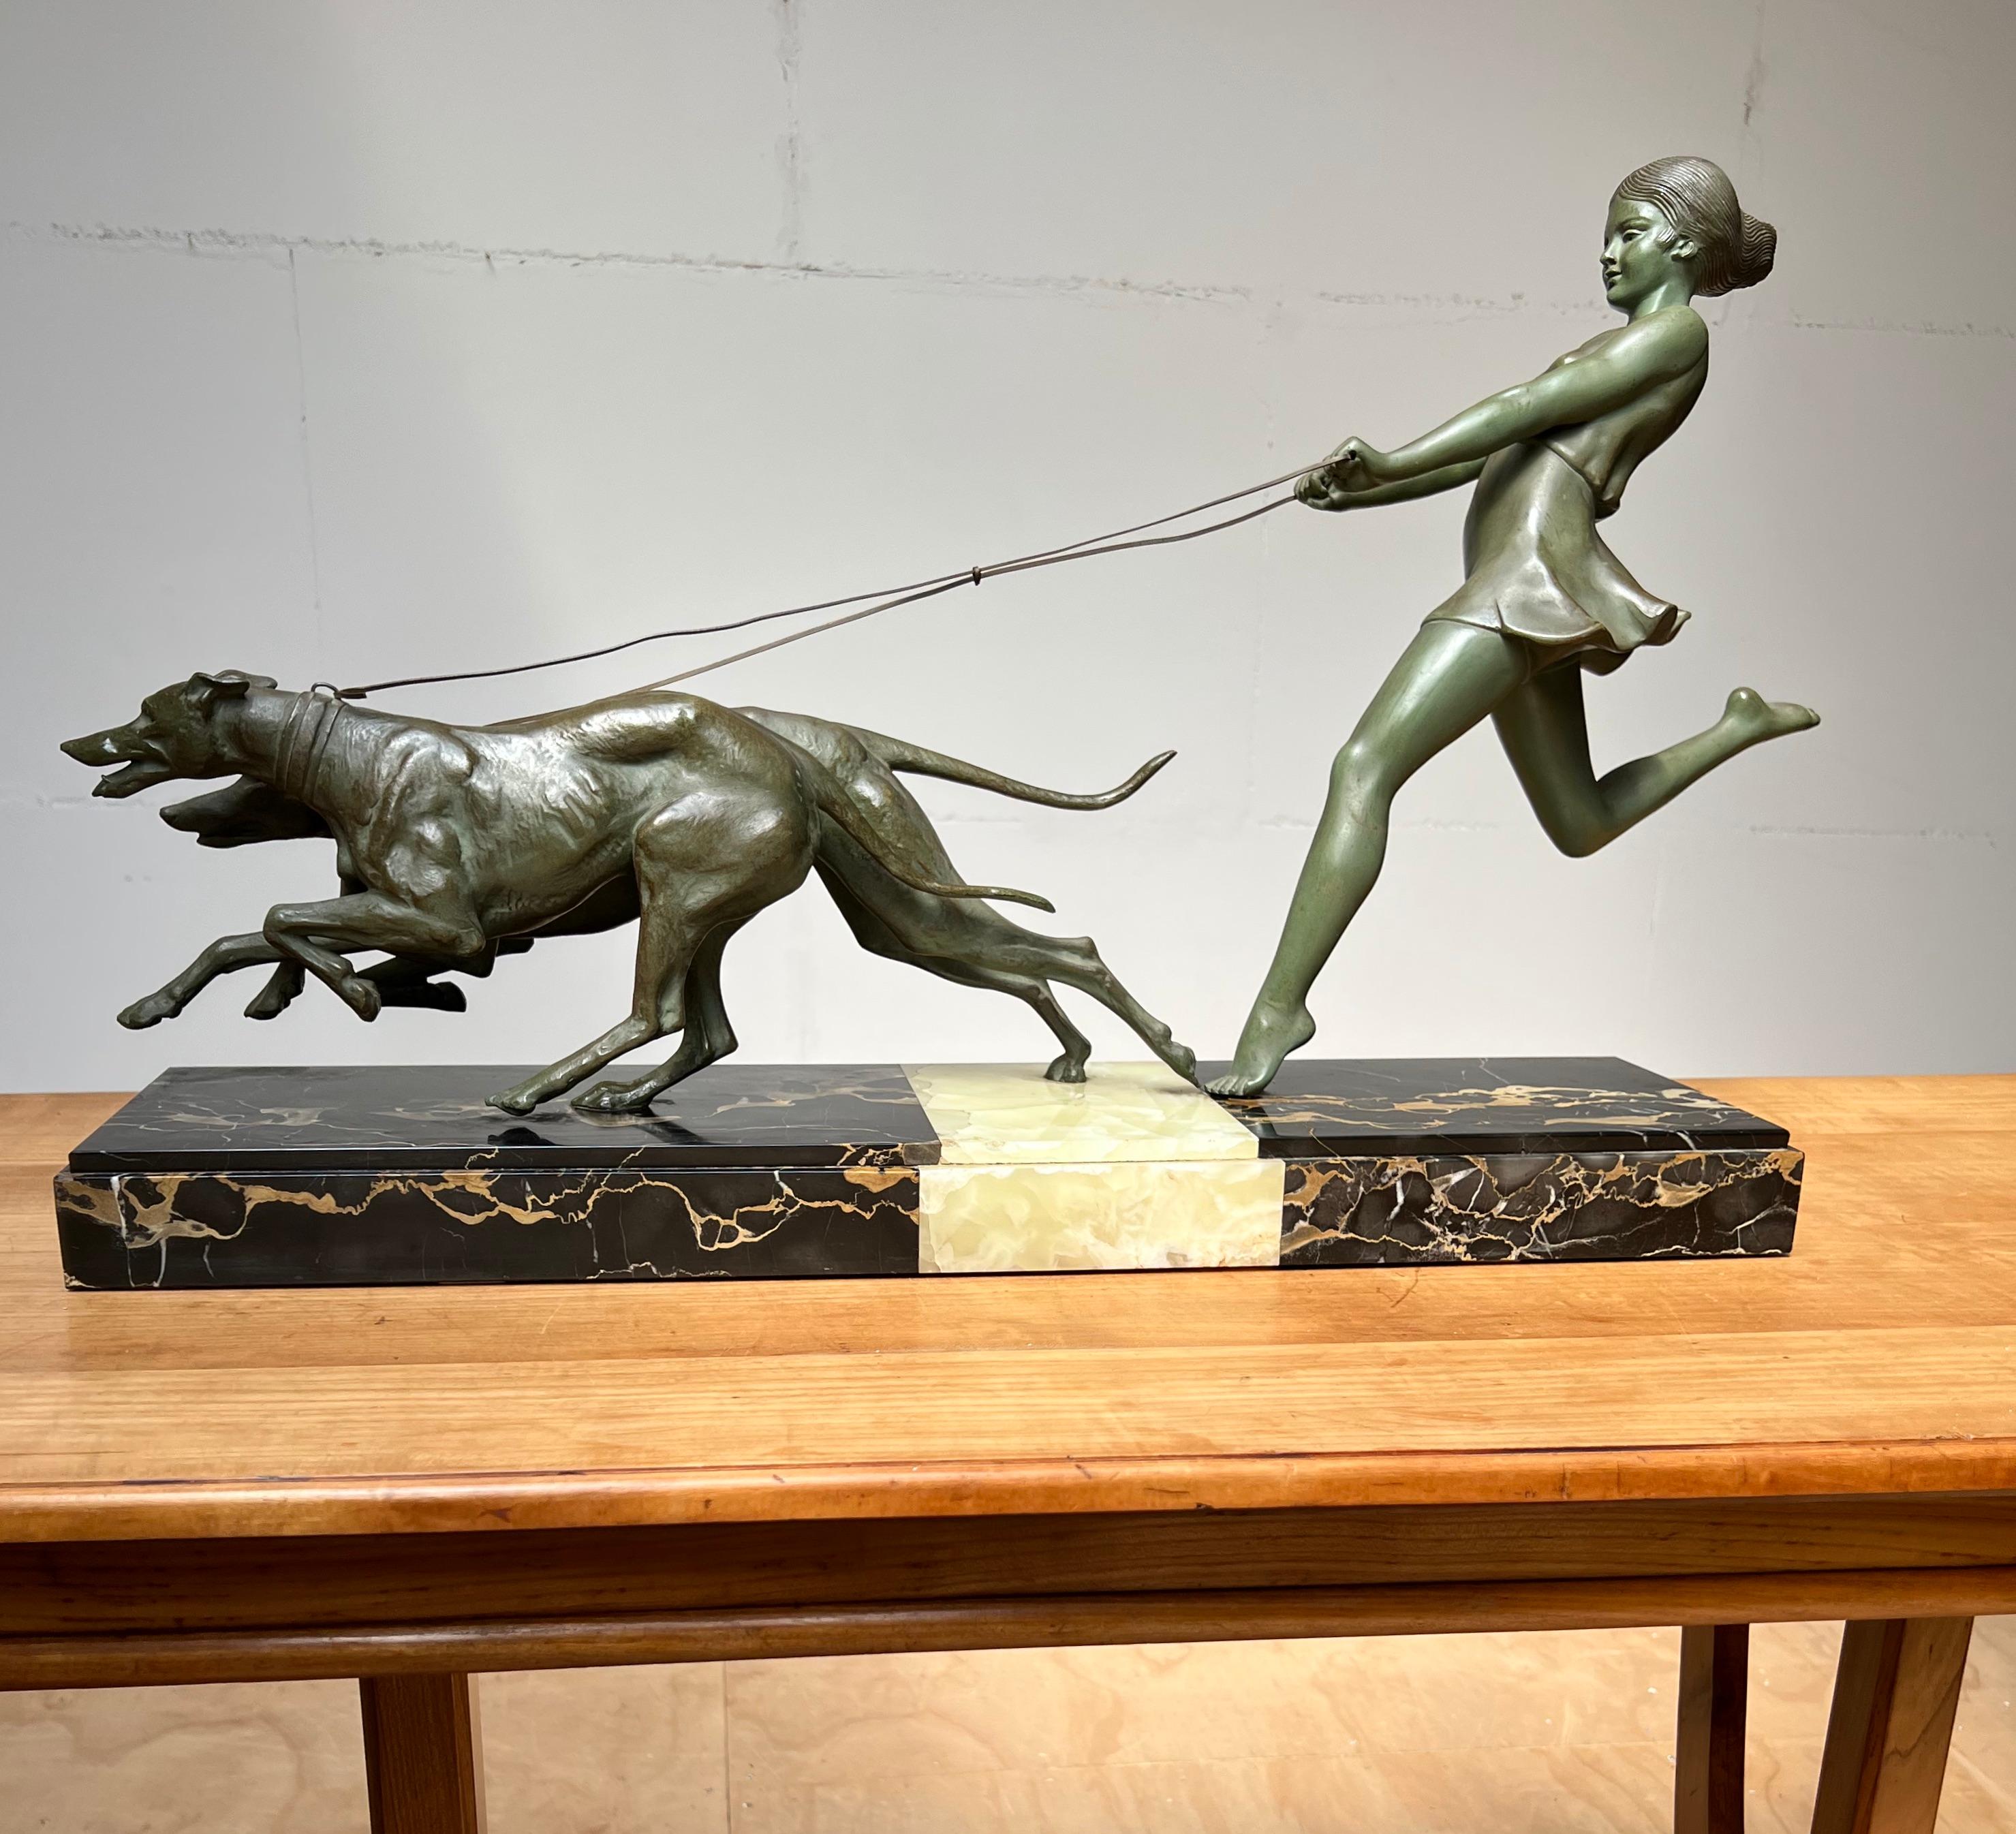 Elegant and joyful sculpture by George Maxim, famous French sculptor of the Art Deco era.

If you are looking for a stylish, top quality made and vivid Art Deco Sculpture then this large and highly decorative work of art could be perfect for you.